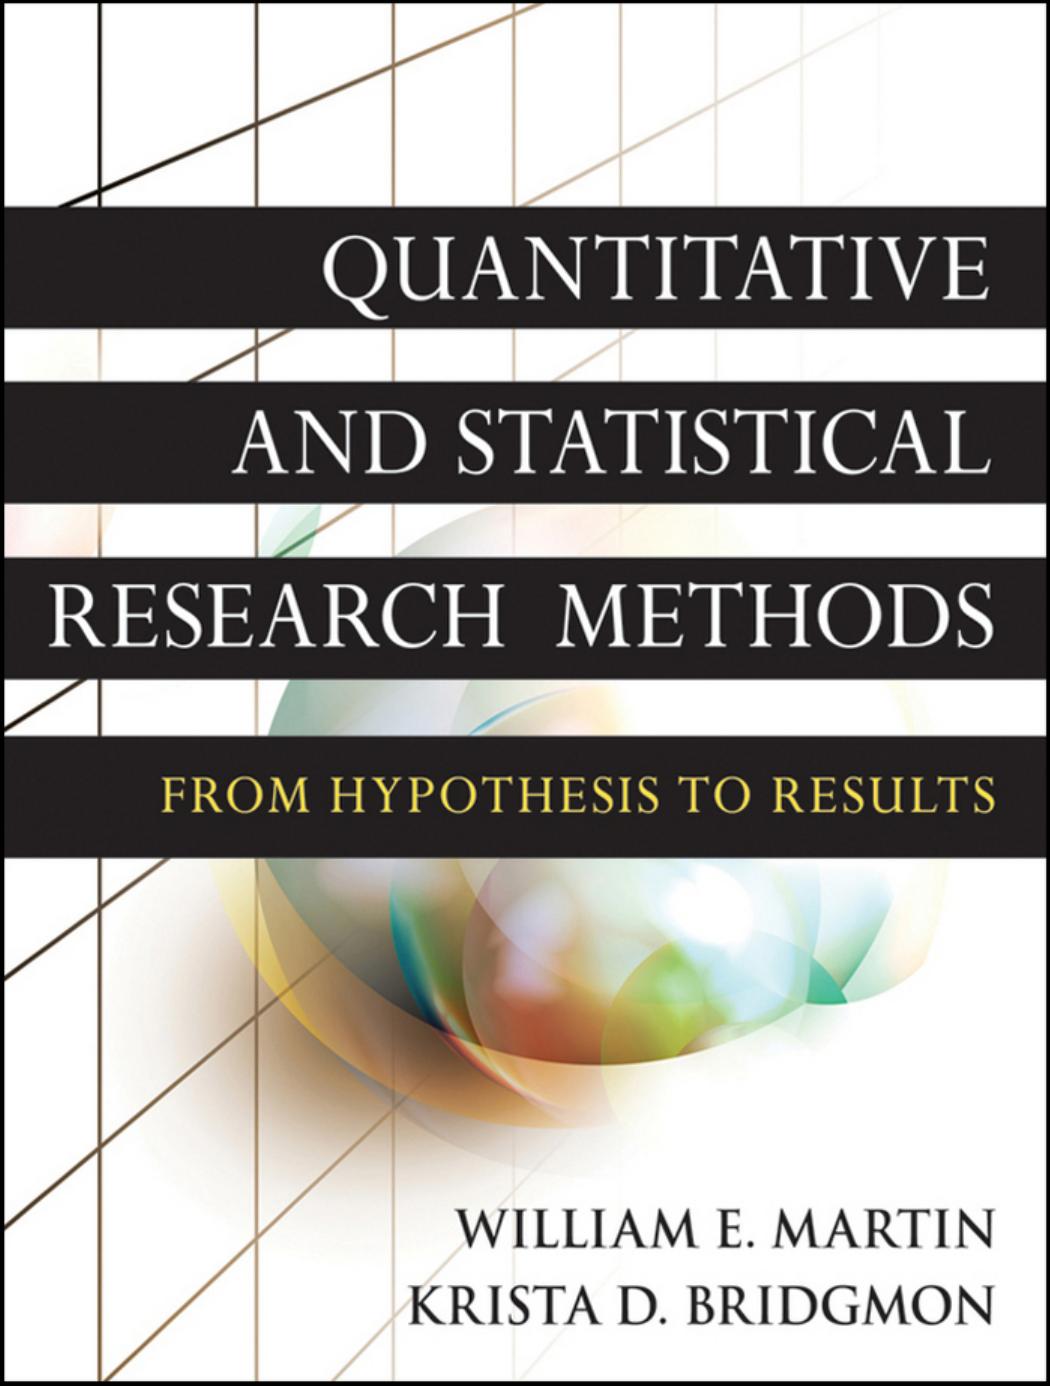 Research Methods for the Social Sciences, Volume 42 : Quantitative and Statistical Research Methods: From Hypothesis to Results